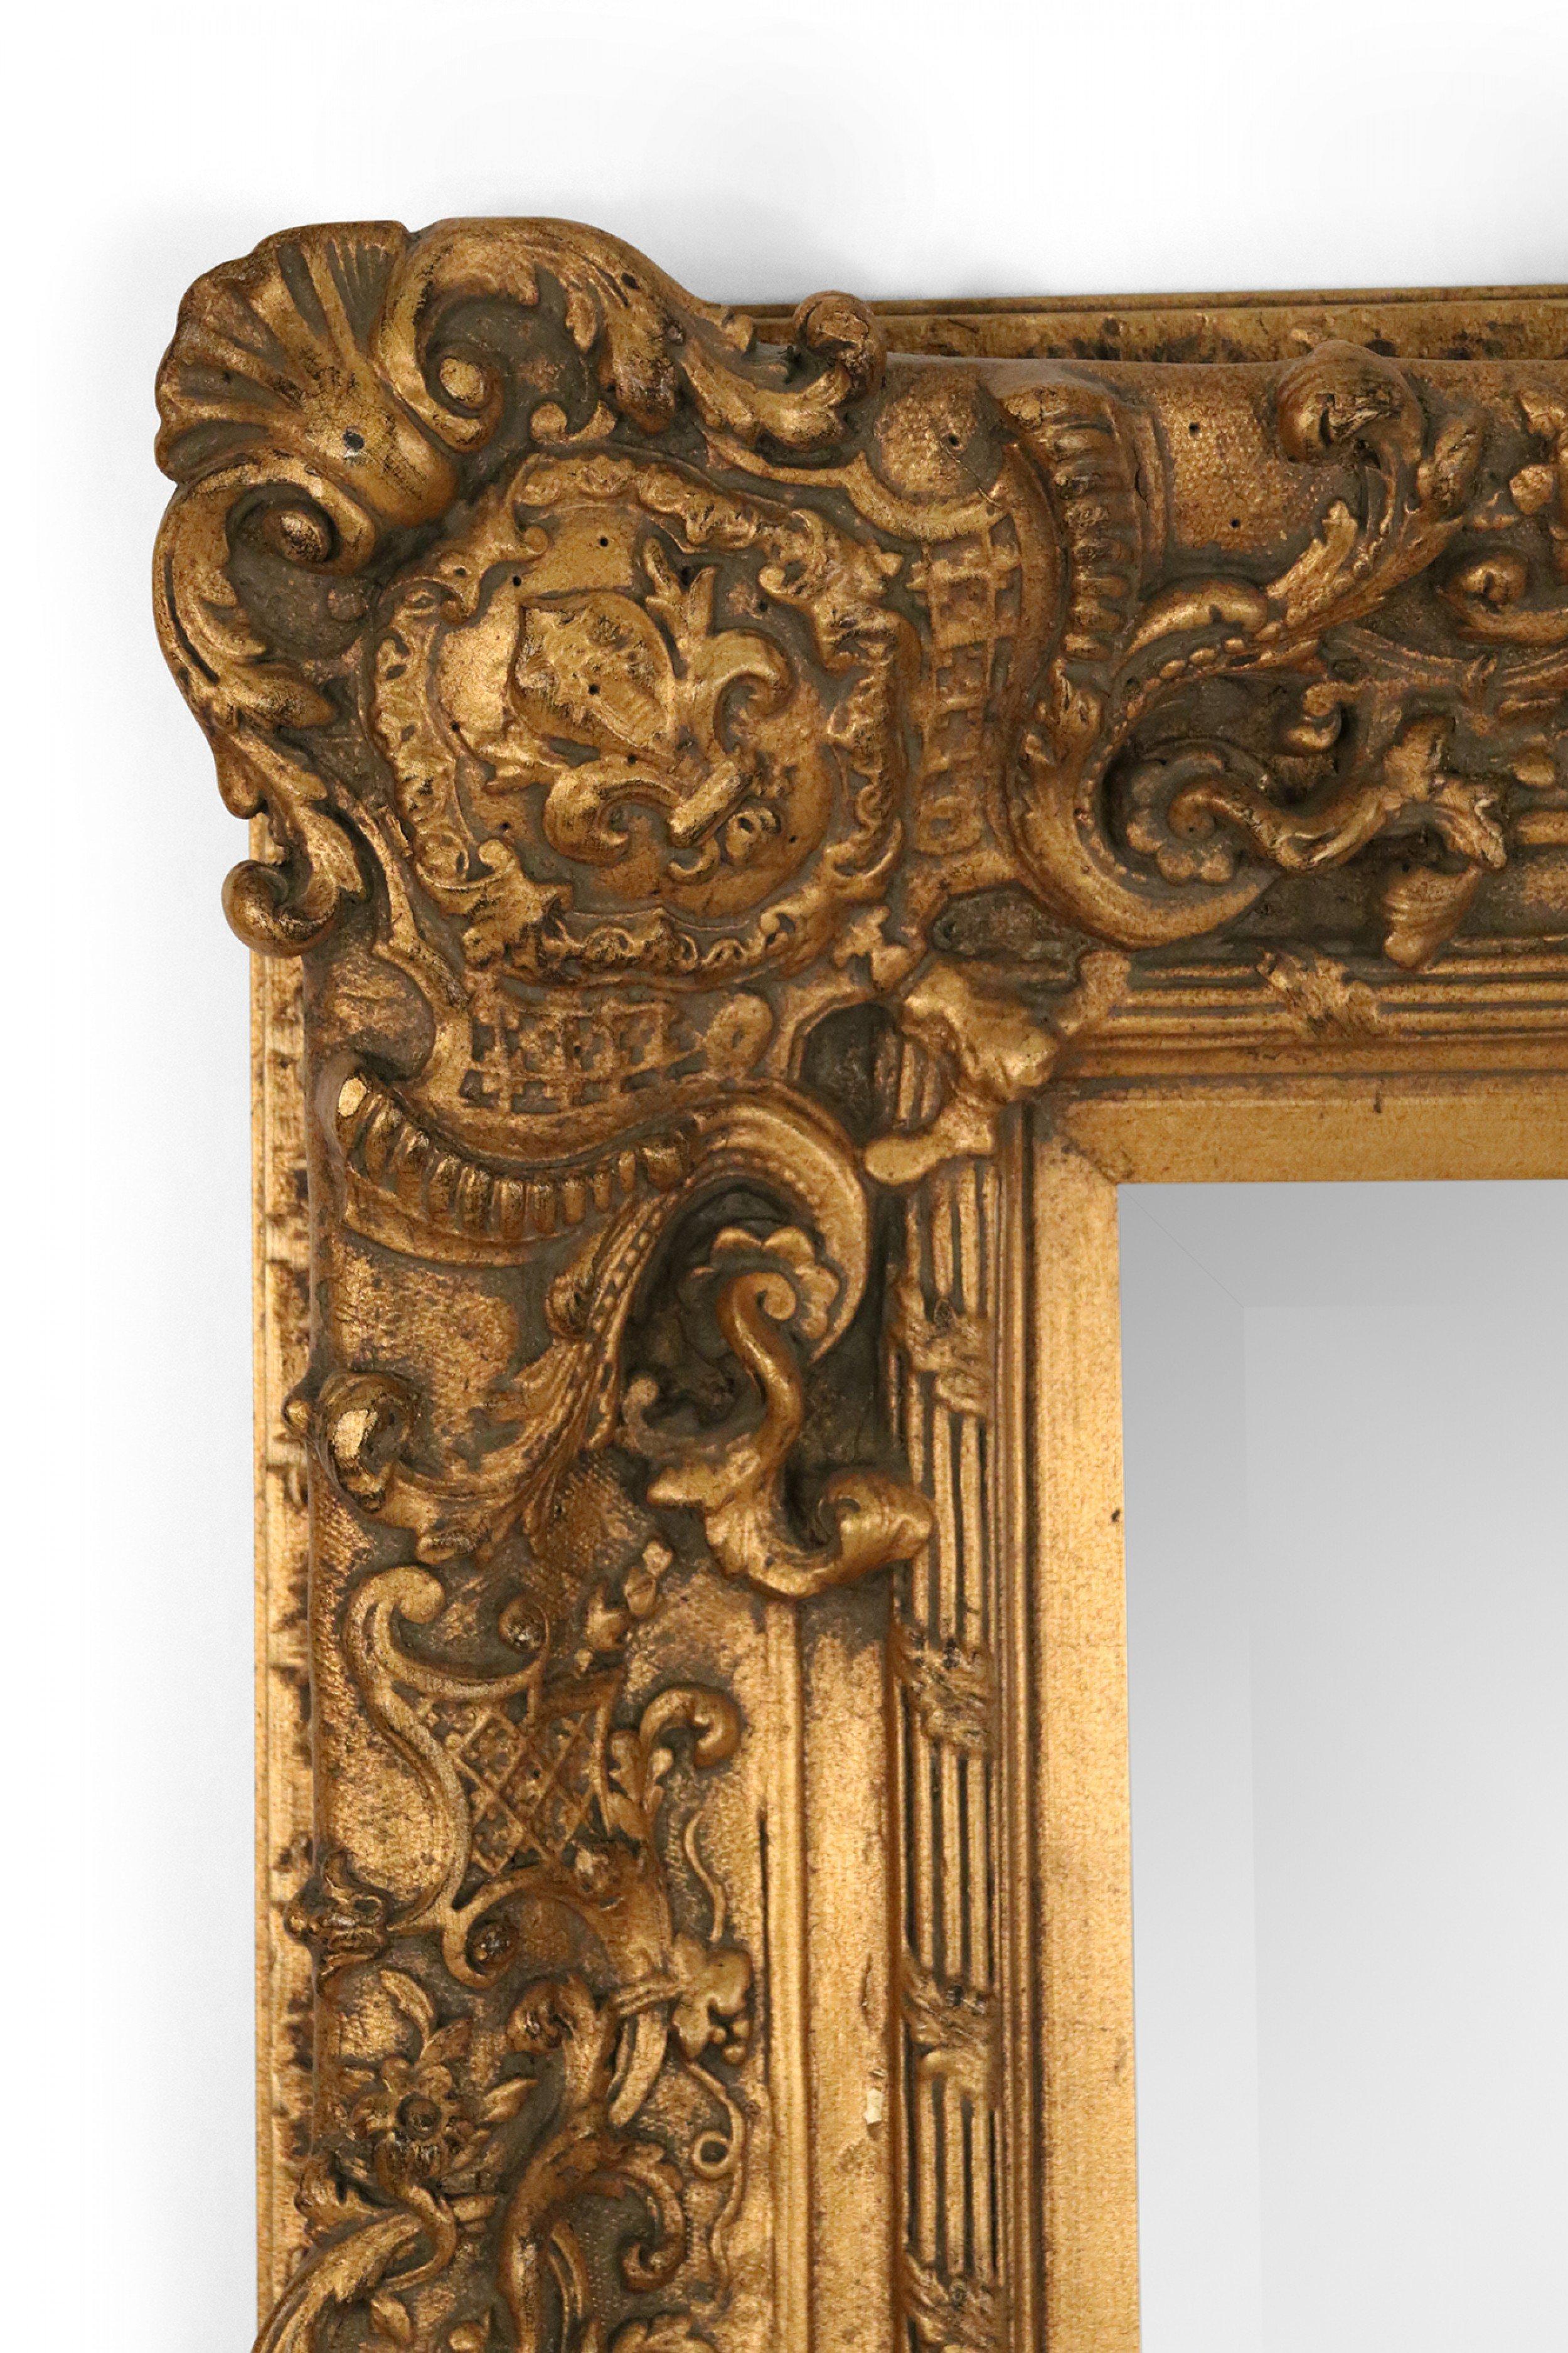 French Louis XV style (19th-20th Century) carved rectangular giltwood wall mirror with fleur-de-lis motif in corners.